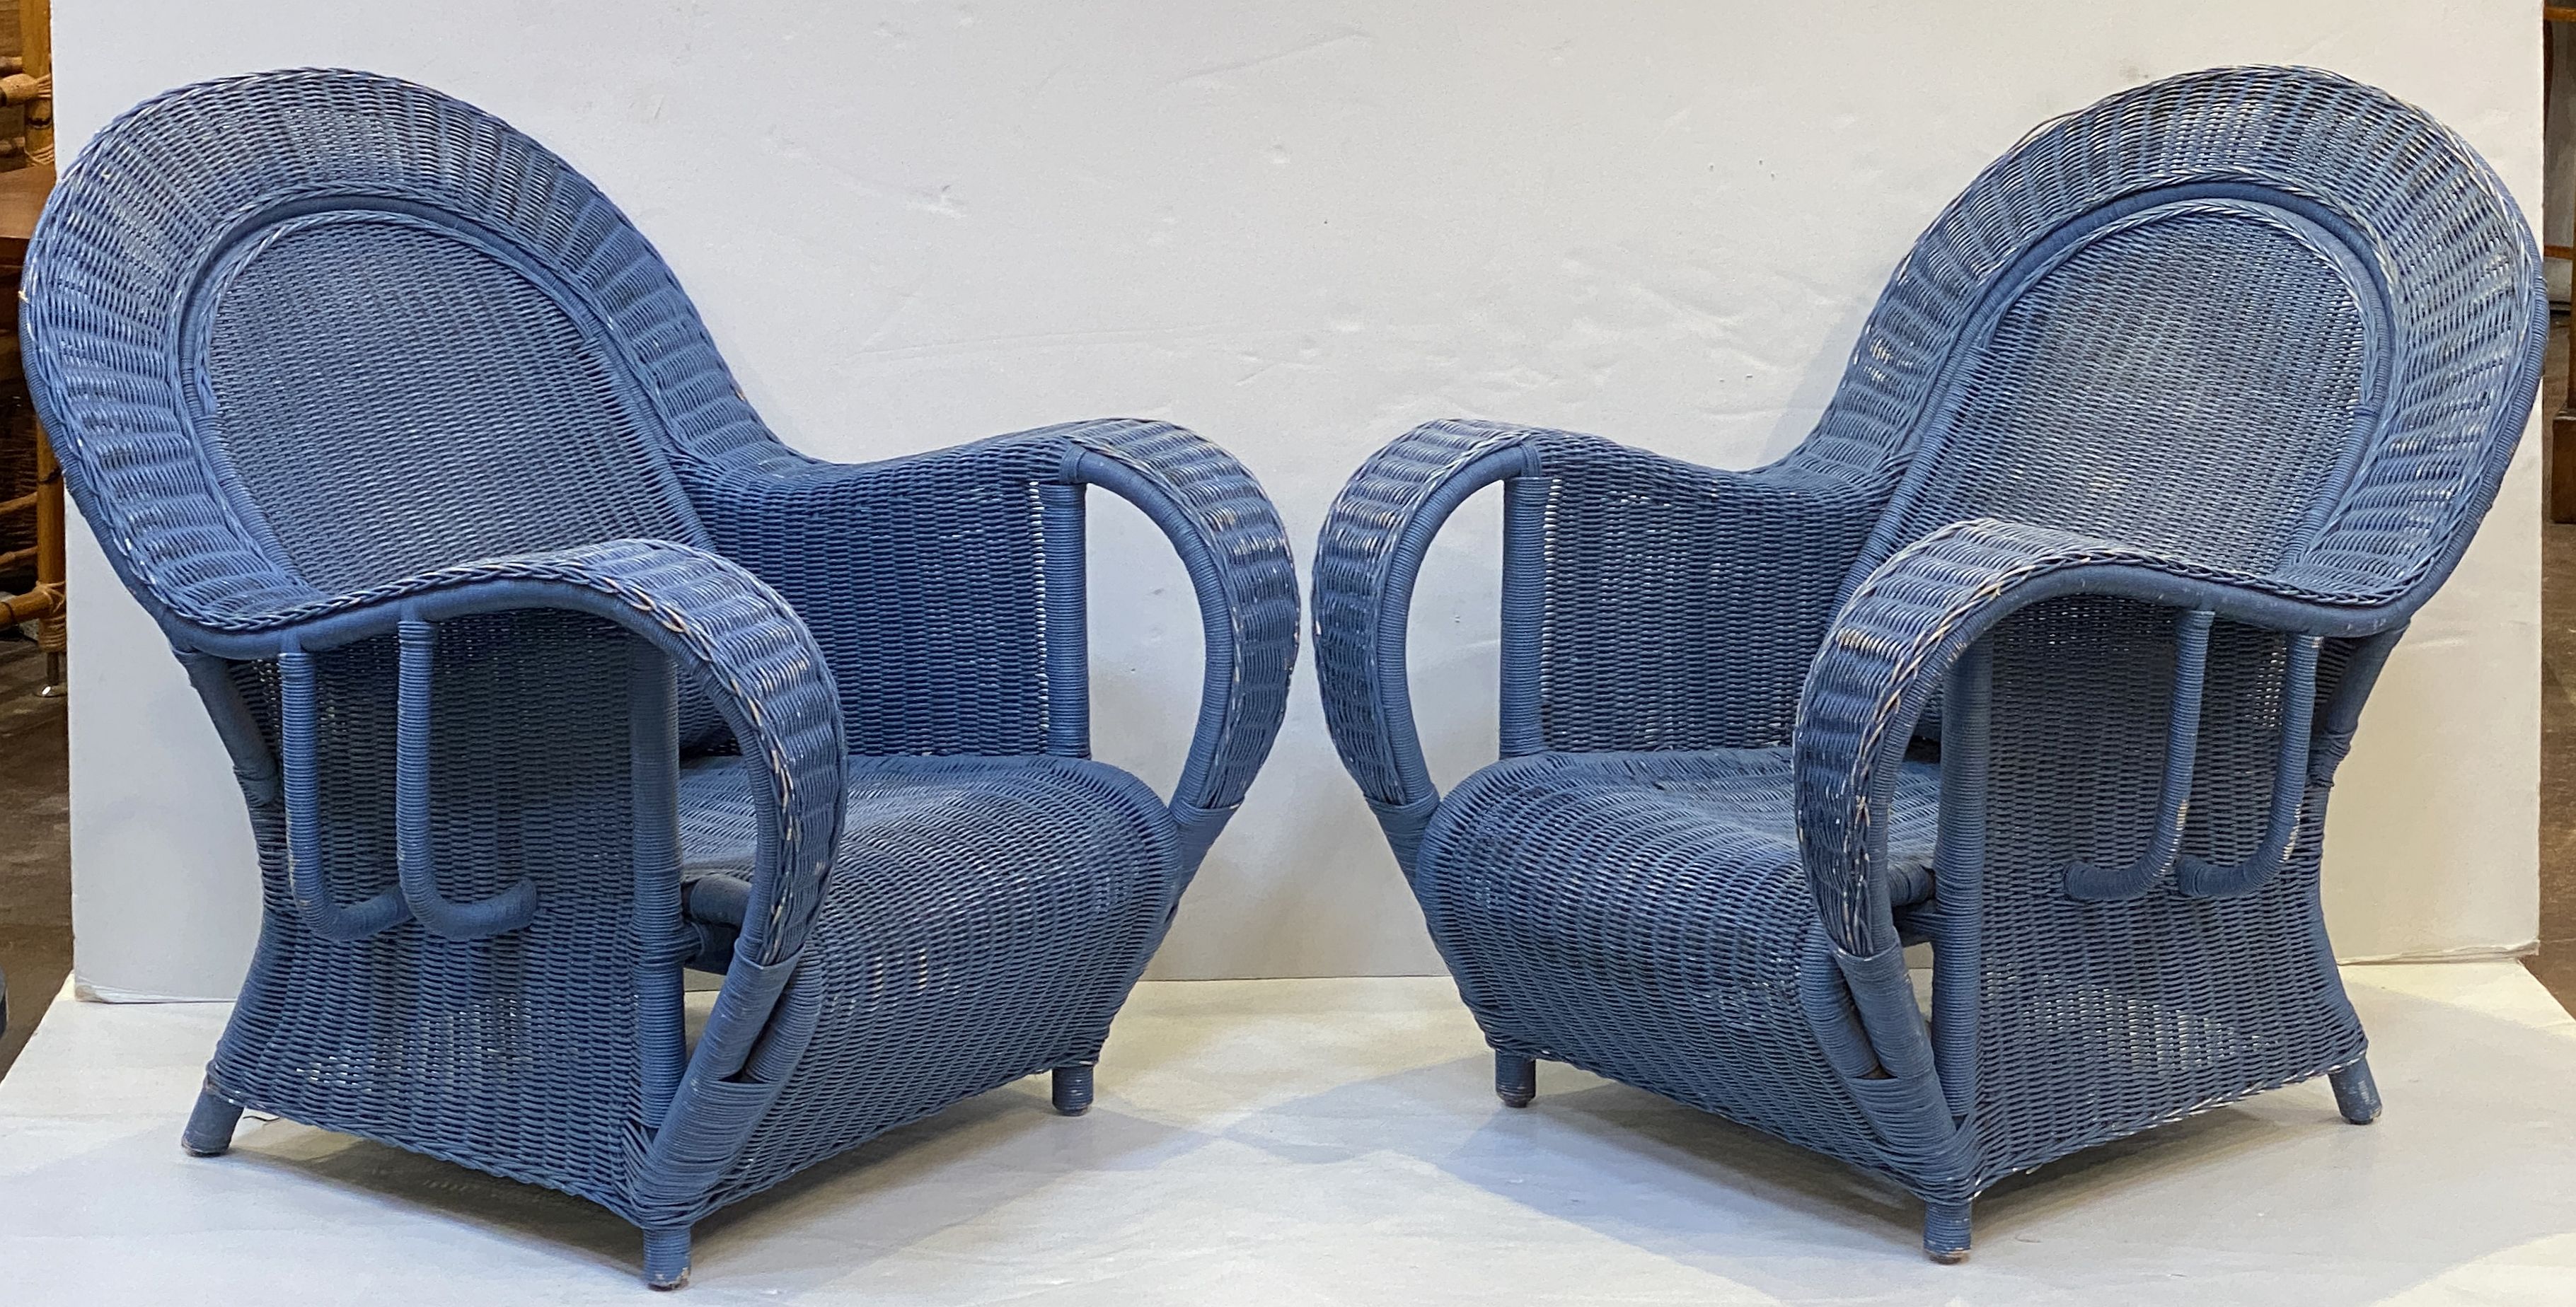 ee652_blue_chairs_france_main_293986524